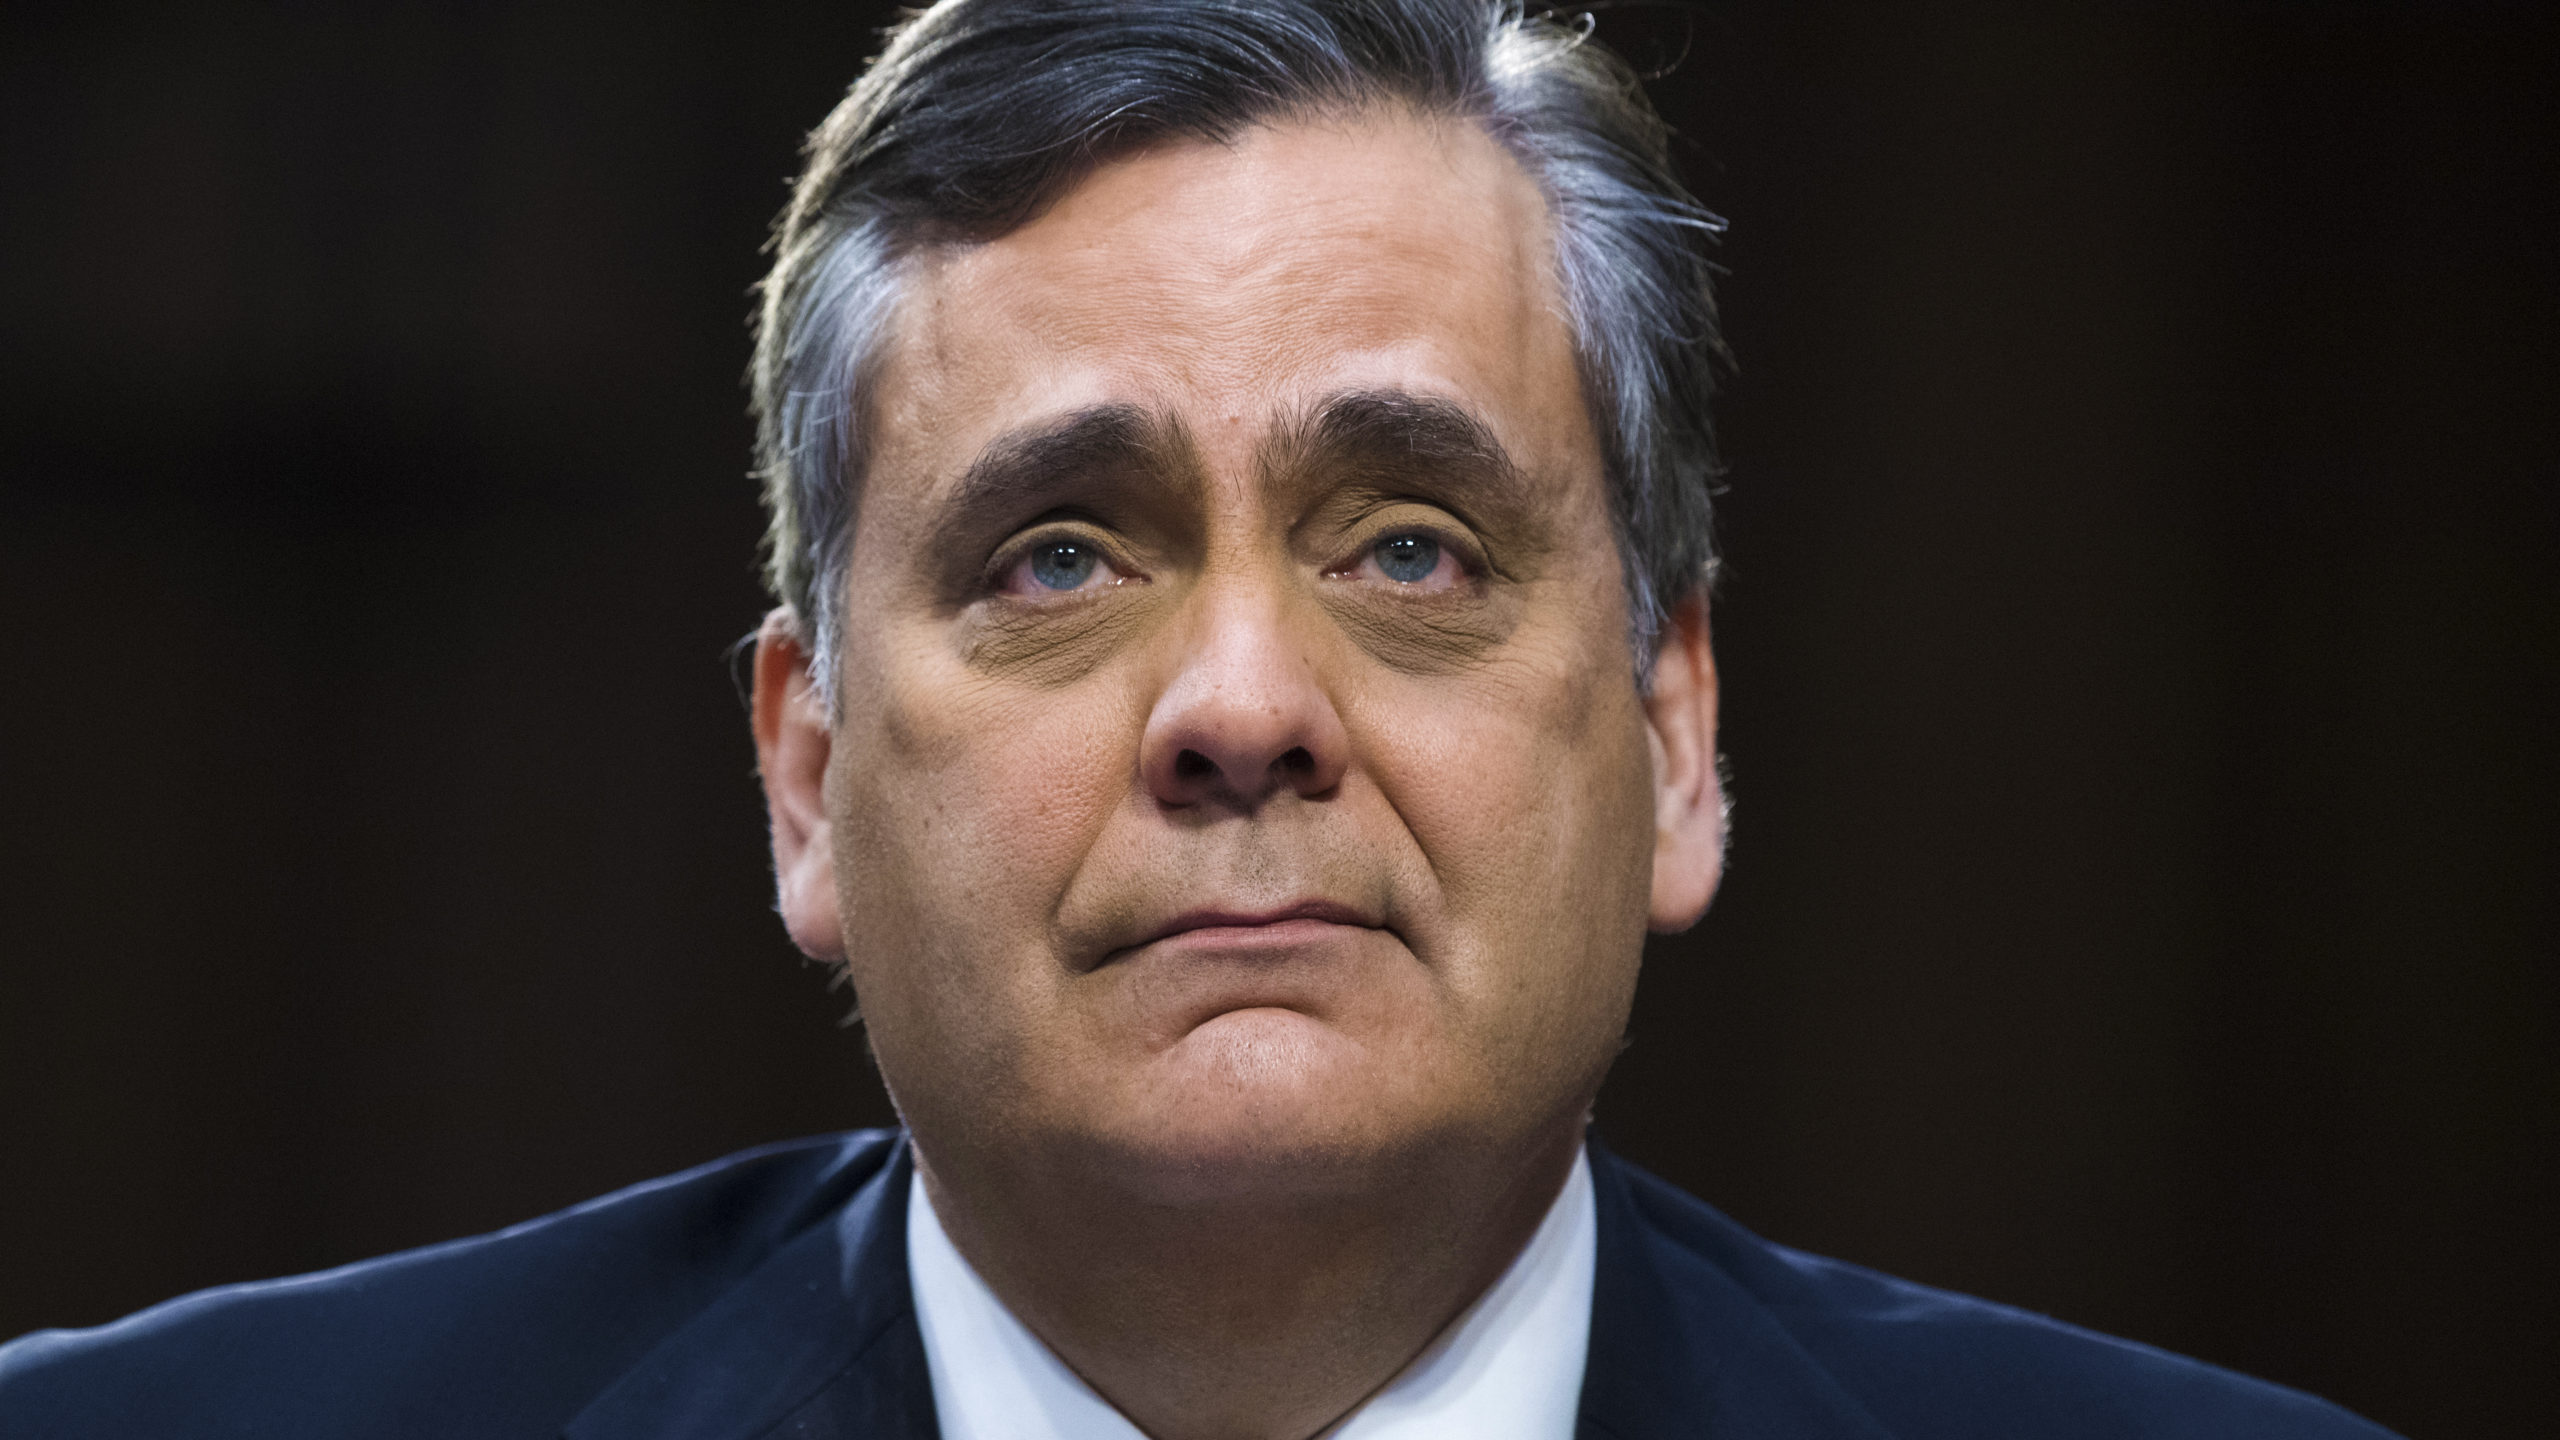 Jonathan Turley emphasizes the importance of balancing presidential immunity in the Supreme Court